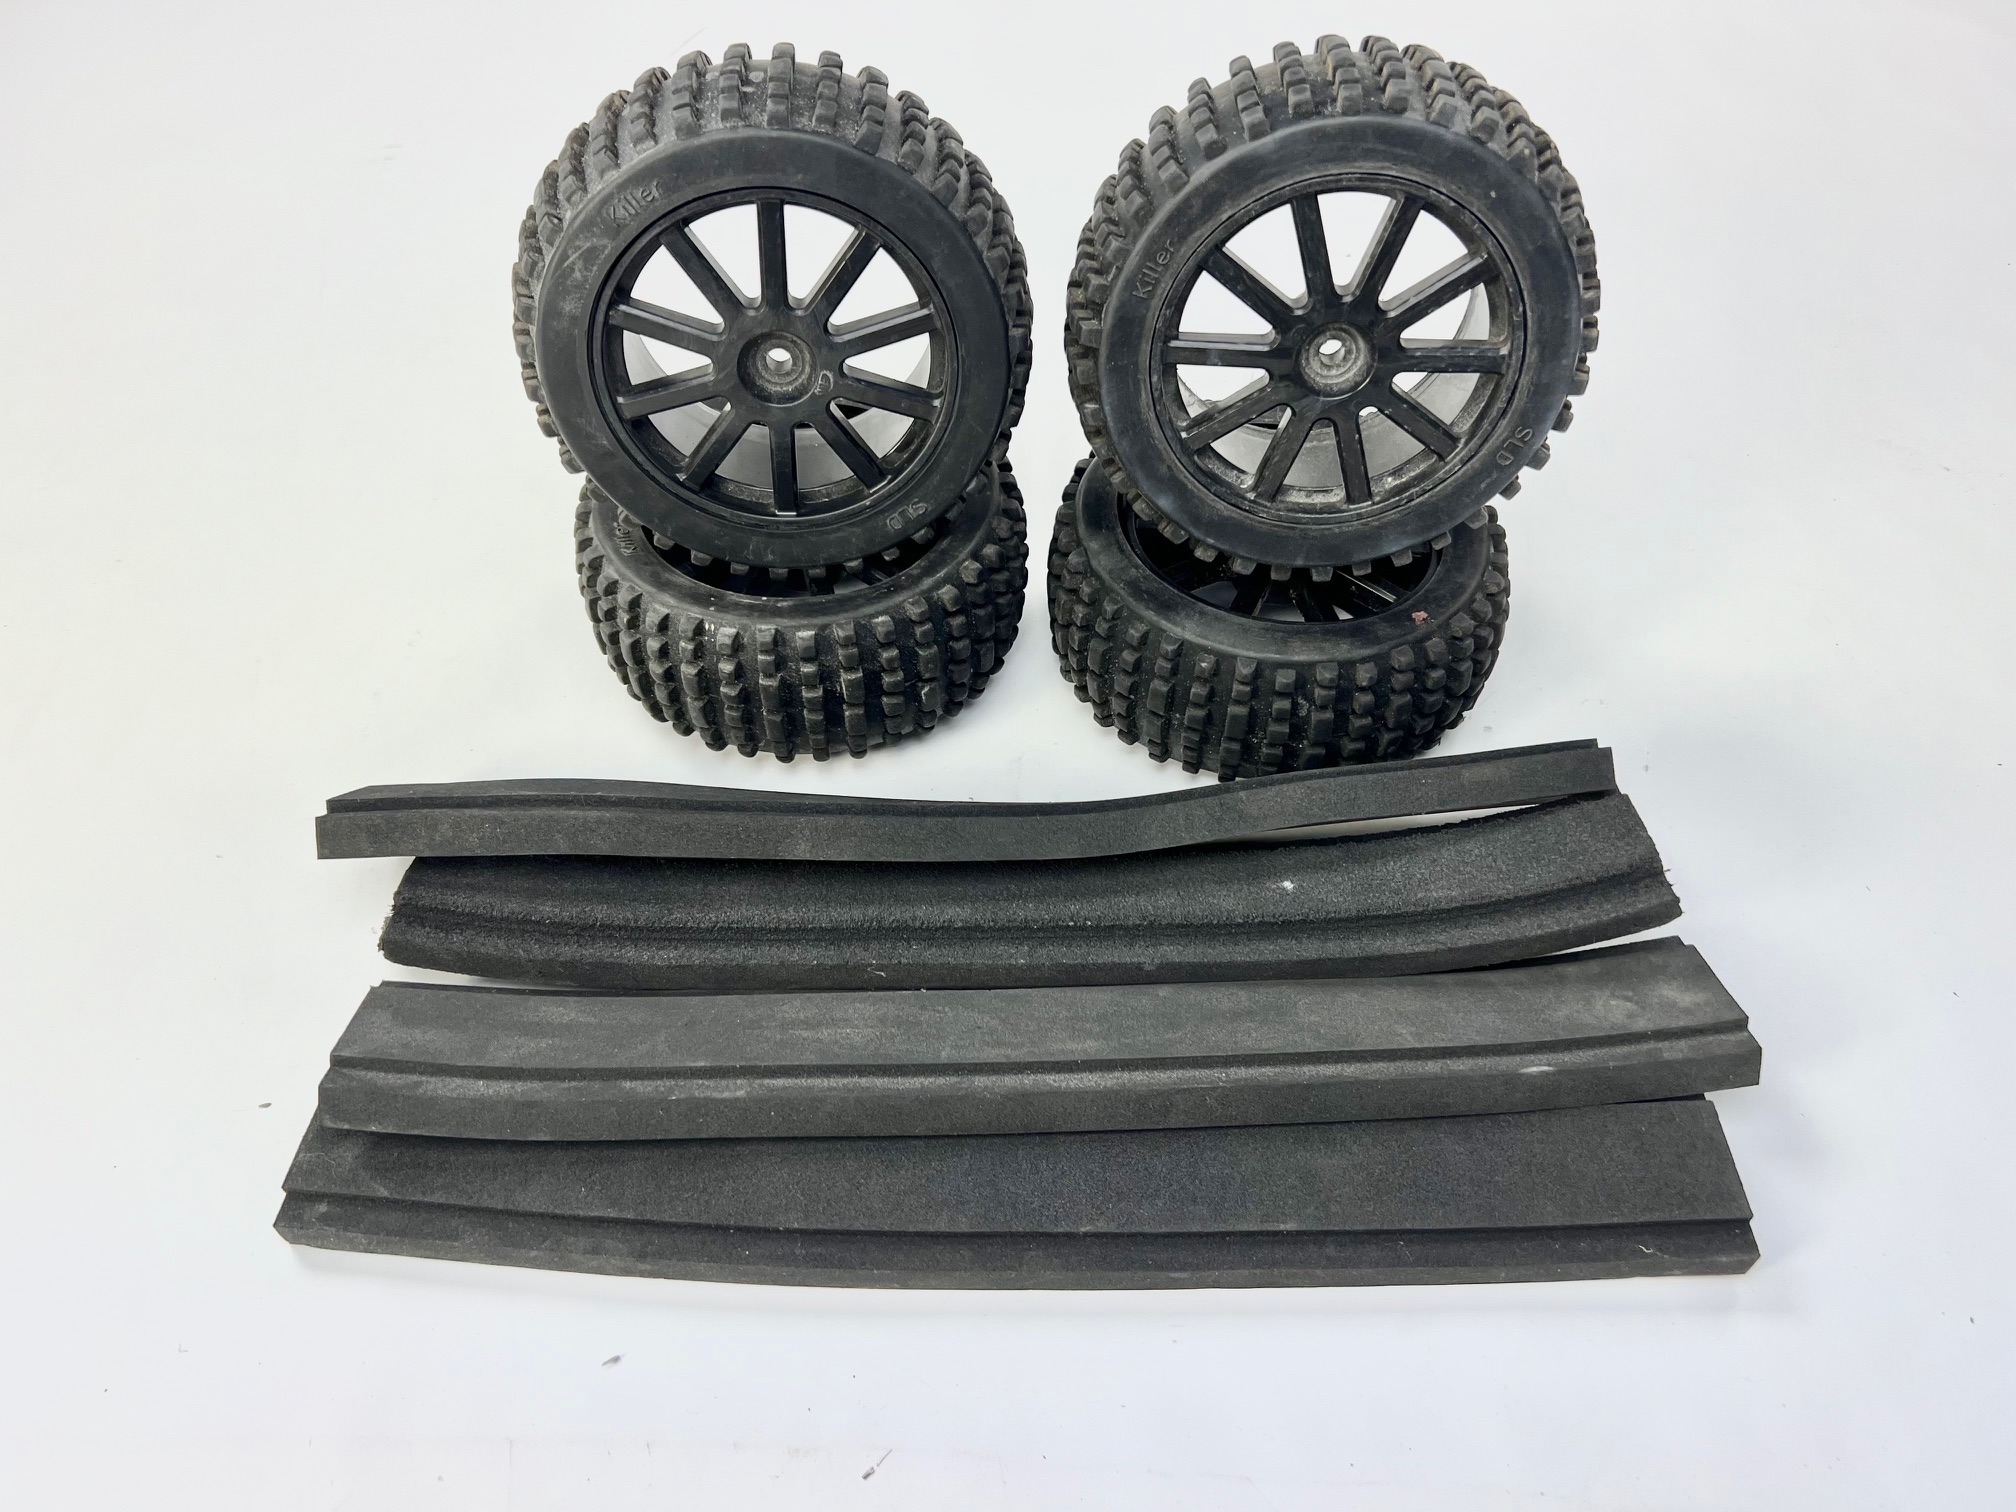 SLD Killer offroad tyres and black Elcon rims with insert set, used